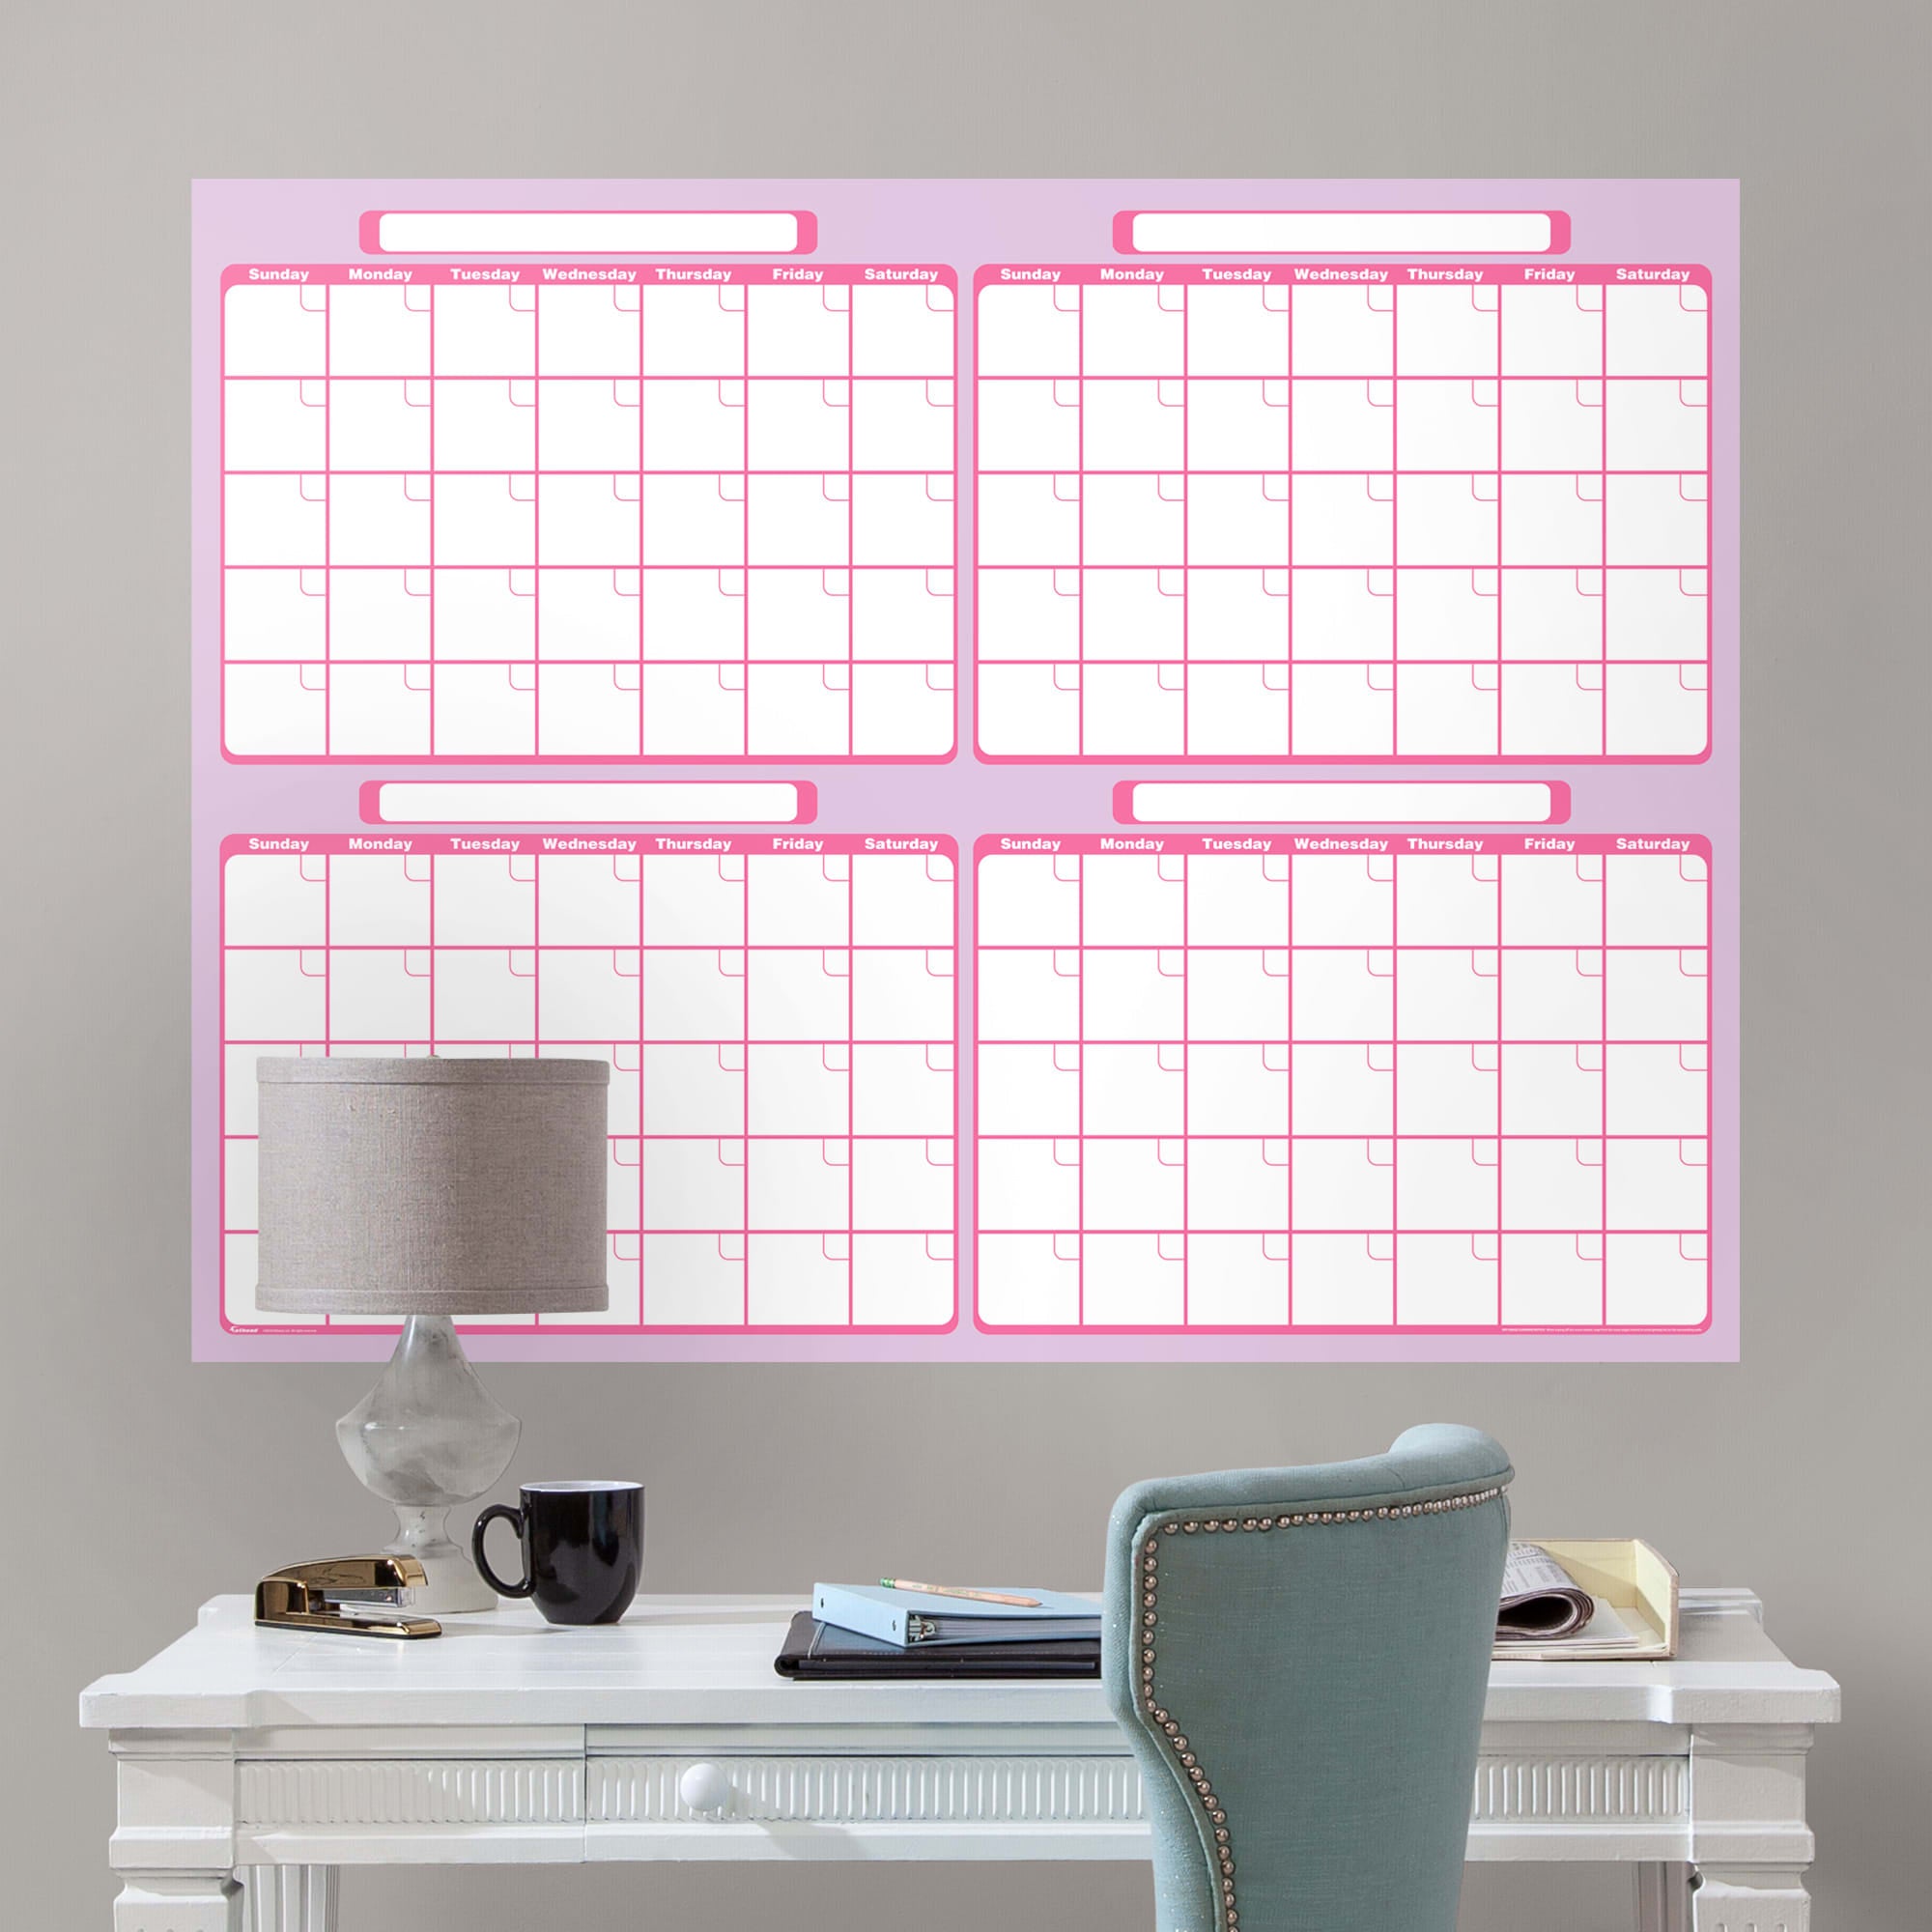 Four Month Calendar - Removable Dry Erase Vinyl Decal in Lavender/Pink (52"Wx39.5"H) by Fathead